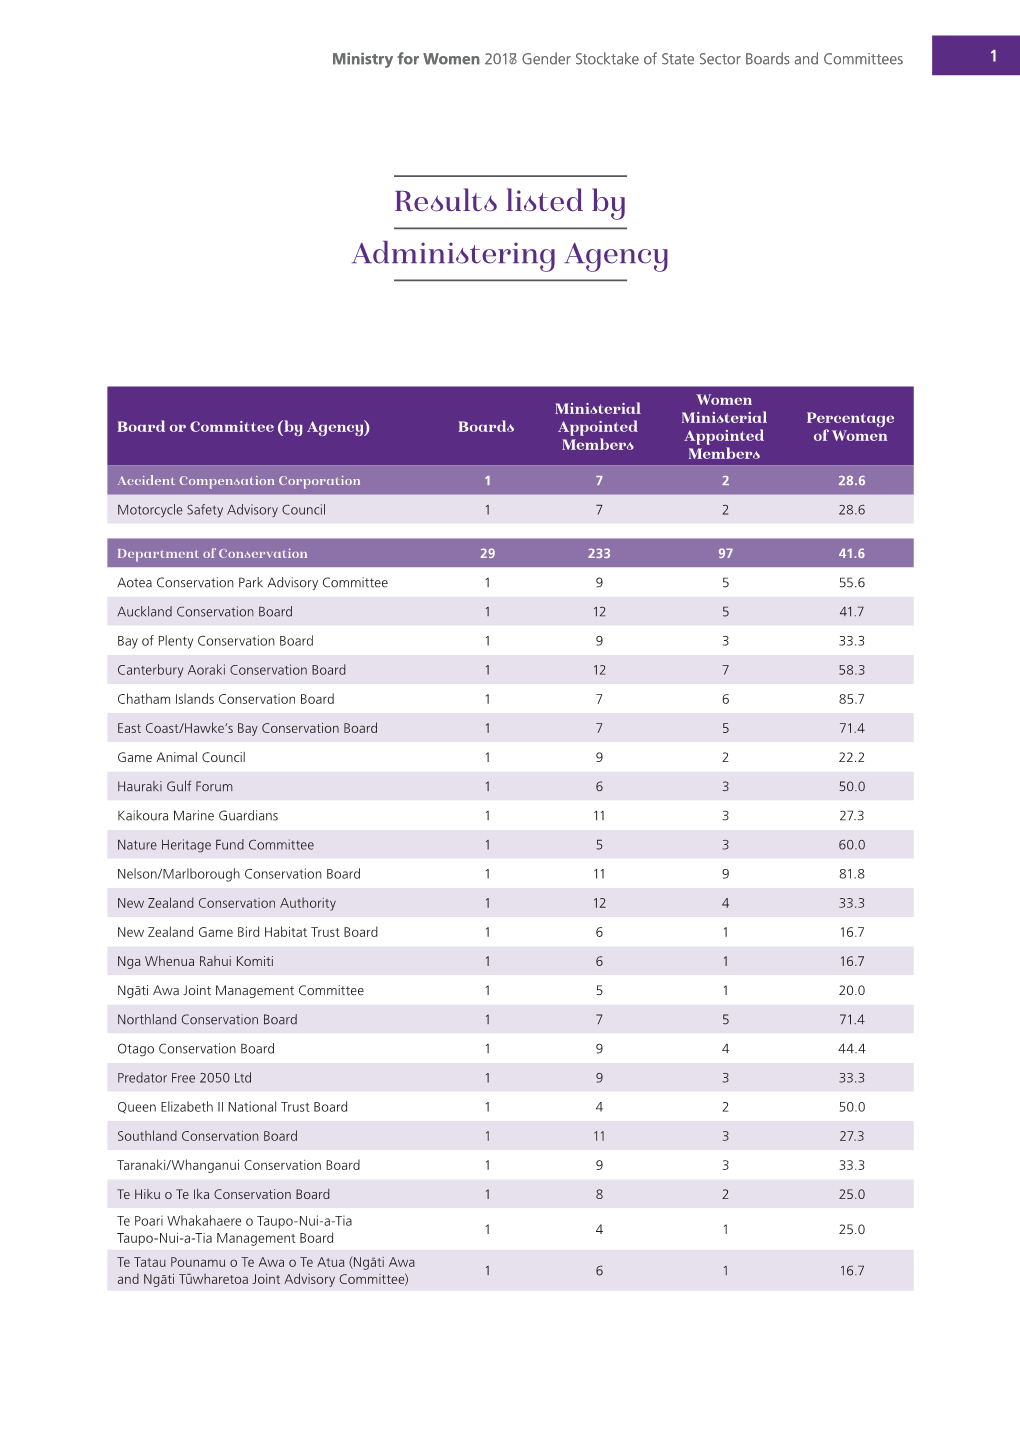 Results Listed by Administering Agency